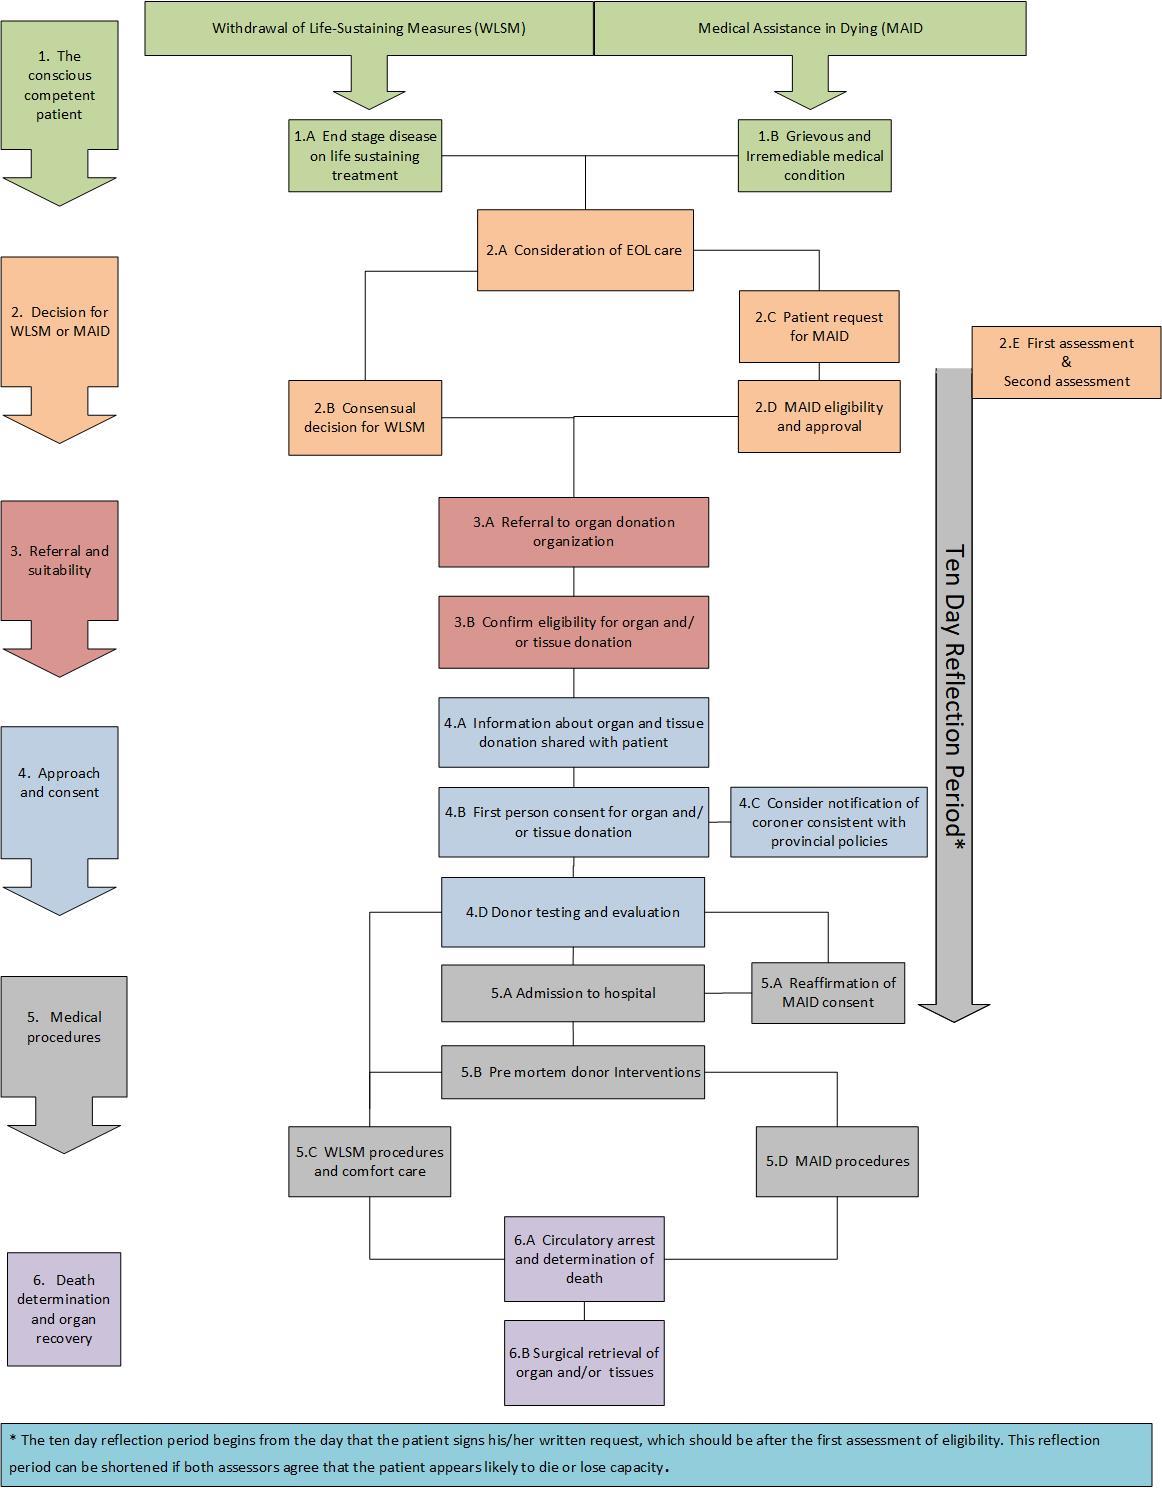 The Clinical Pathway for Organ Donation in Conscious Competent Patients